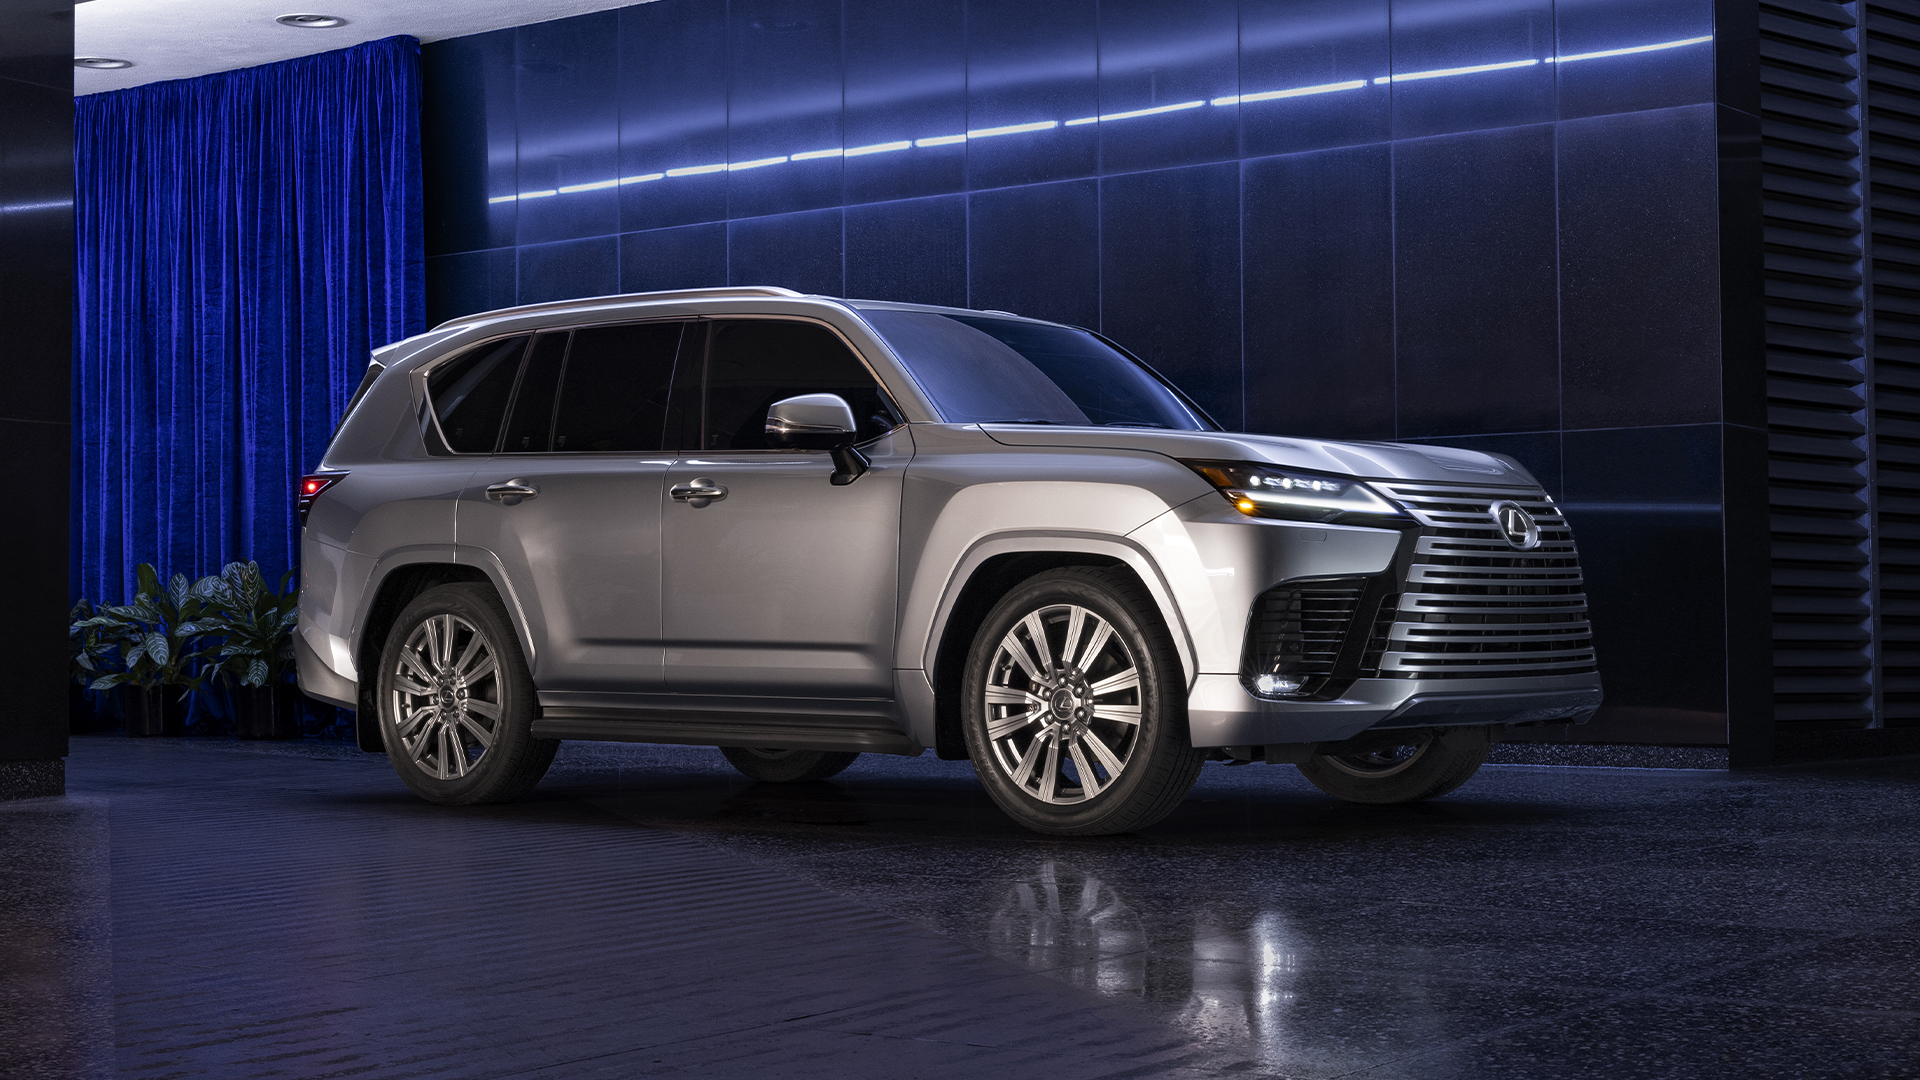 A New Icon: The 2022 Lexus LX 600 Flagship SUV